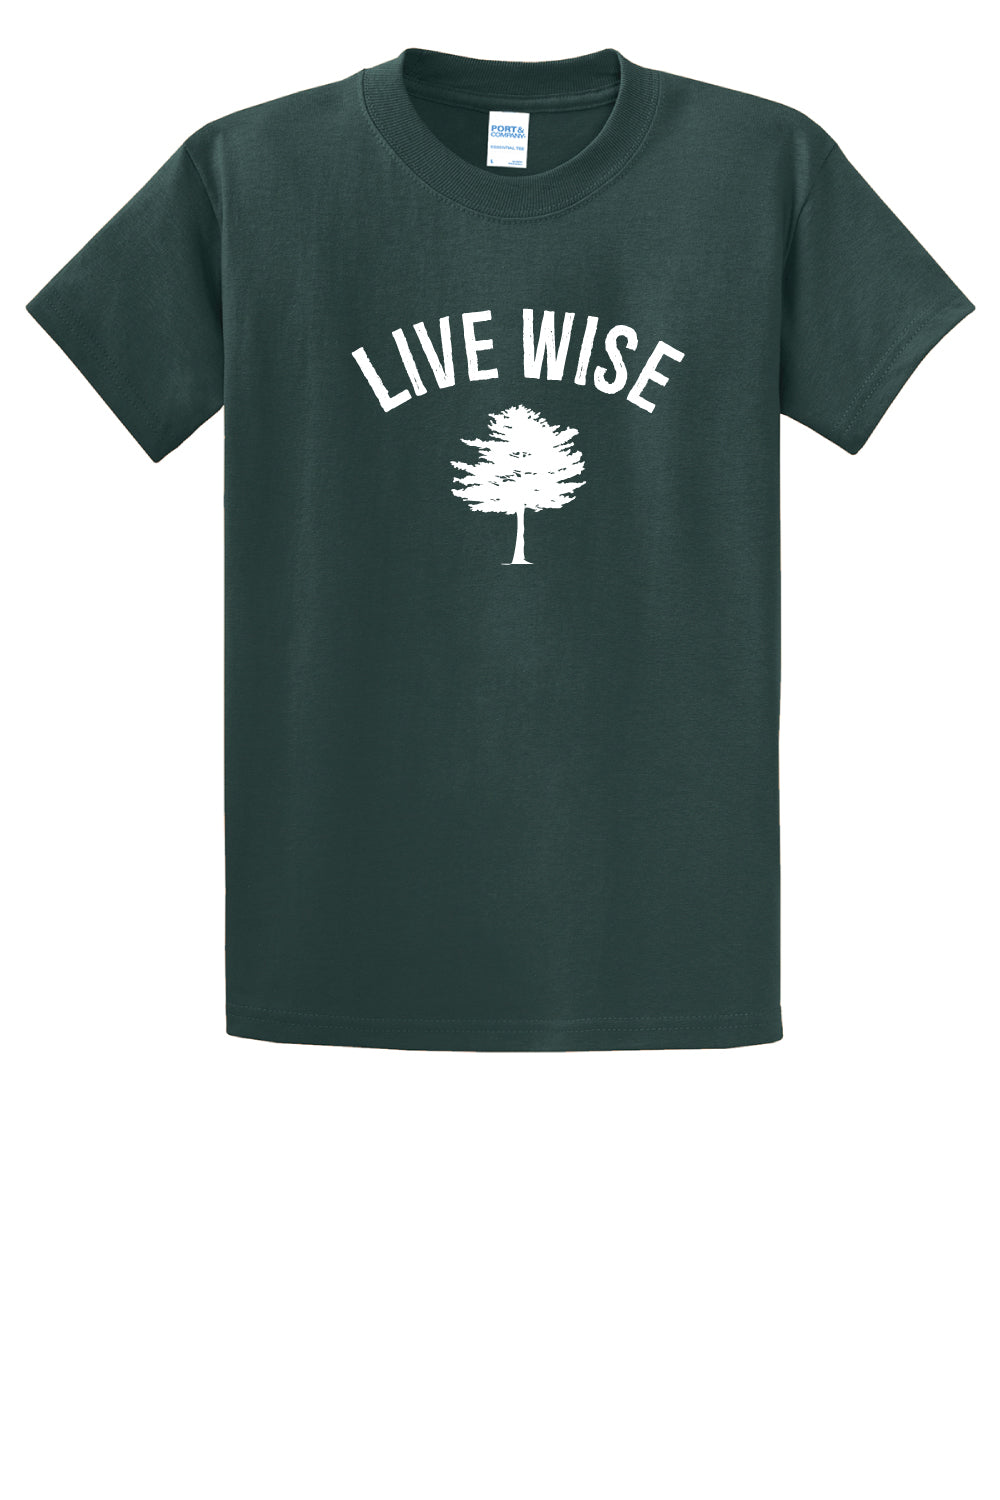 Camp Wise Live Wise Tee